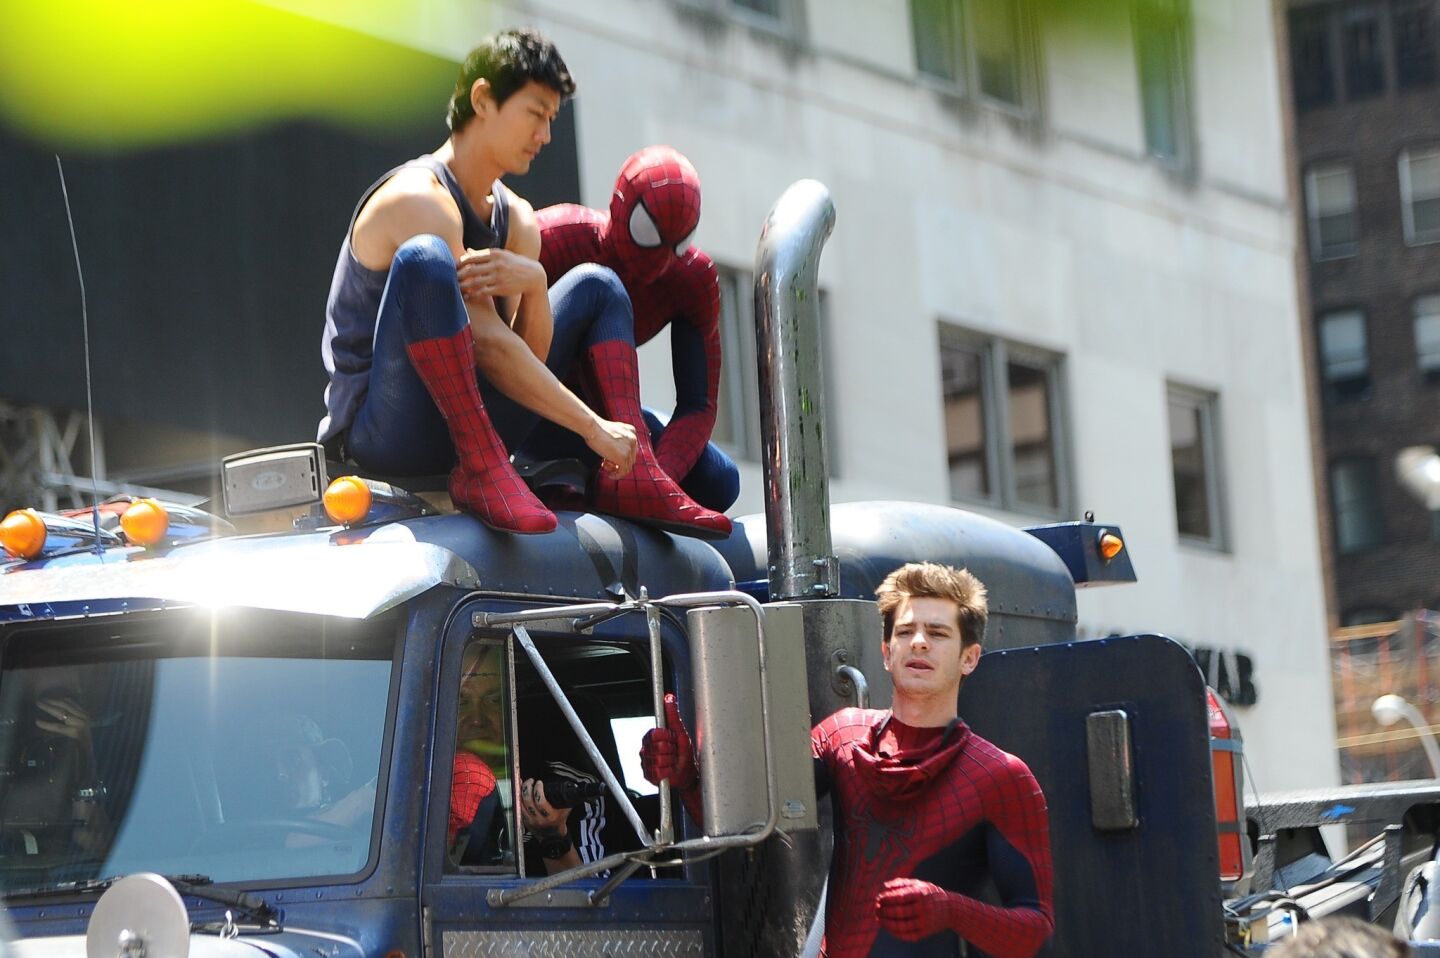 Actor Andrew Garfield, right, his stunt double William Spencer, center, and a second stunt double are seen on the set of "The Amazing Spider-Man 2" in New York City.